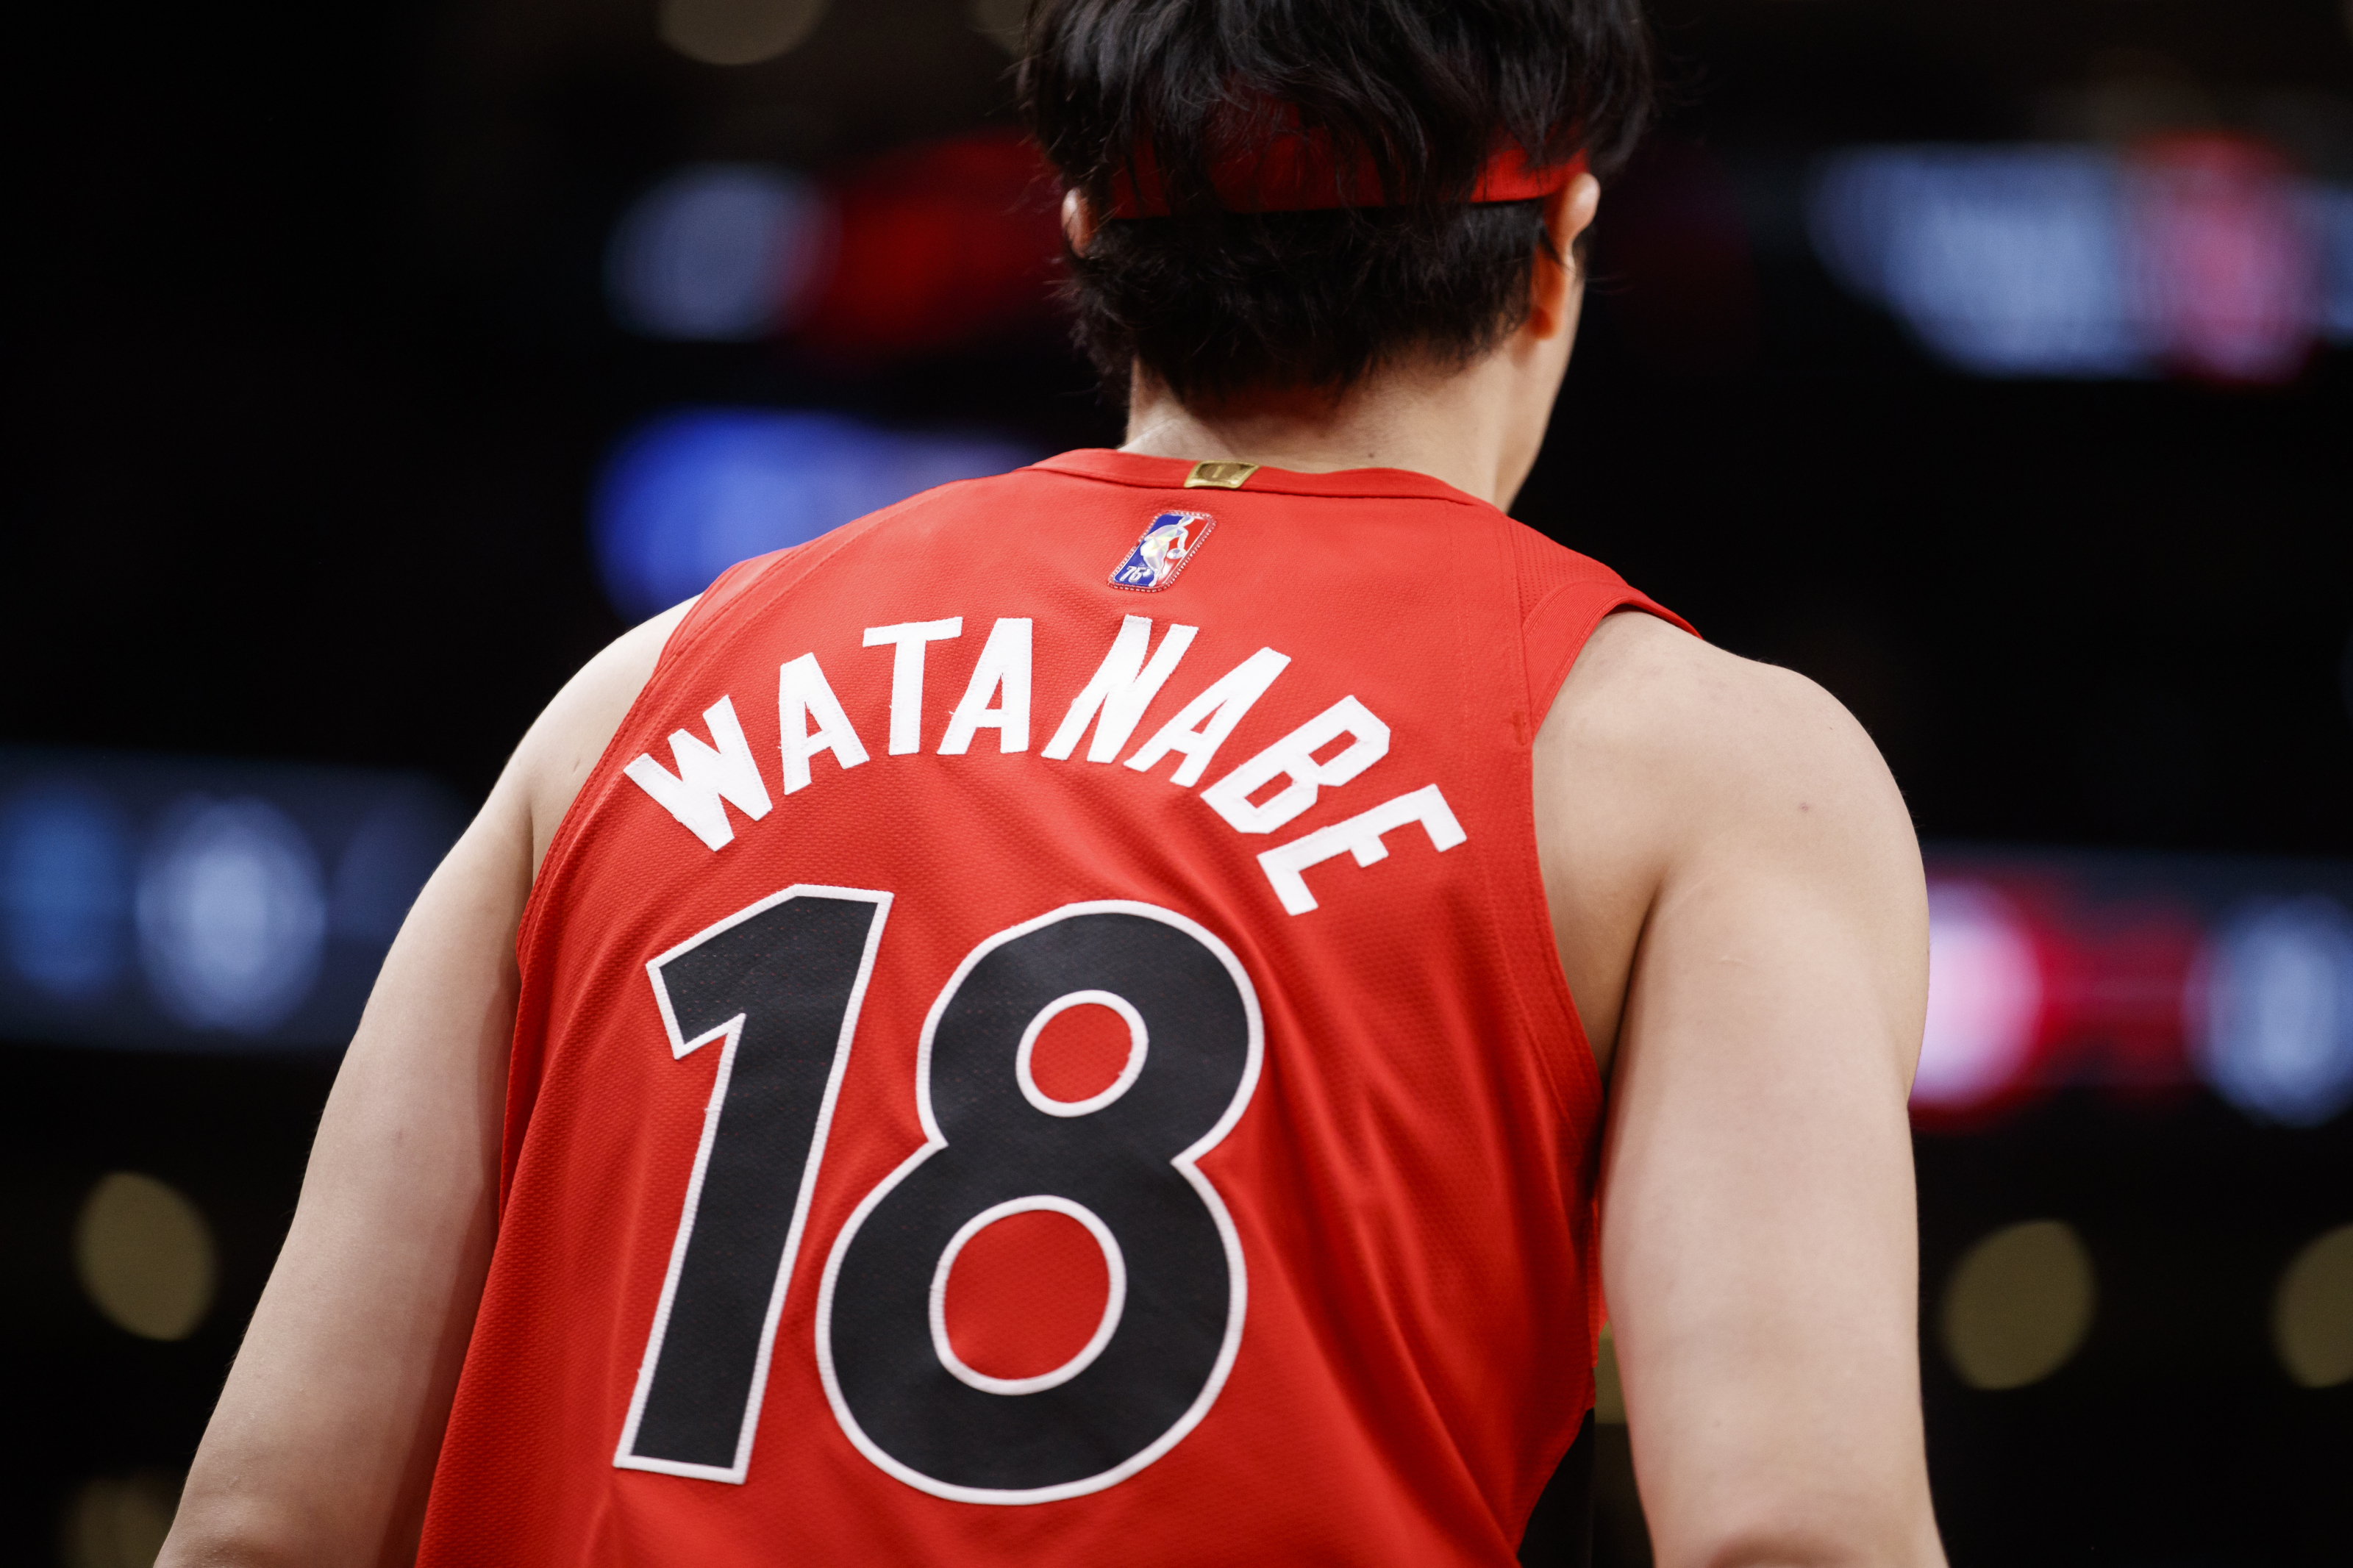 Yuta Watanabe Vows to Keep Playing for Japan National Team